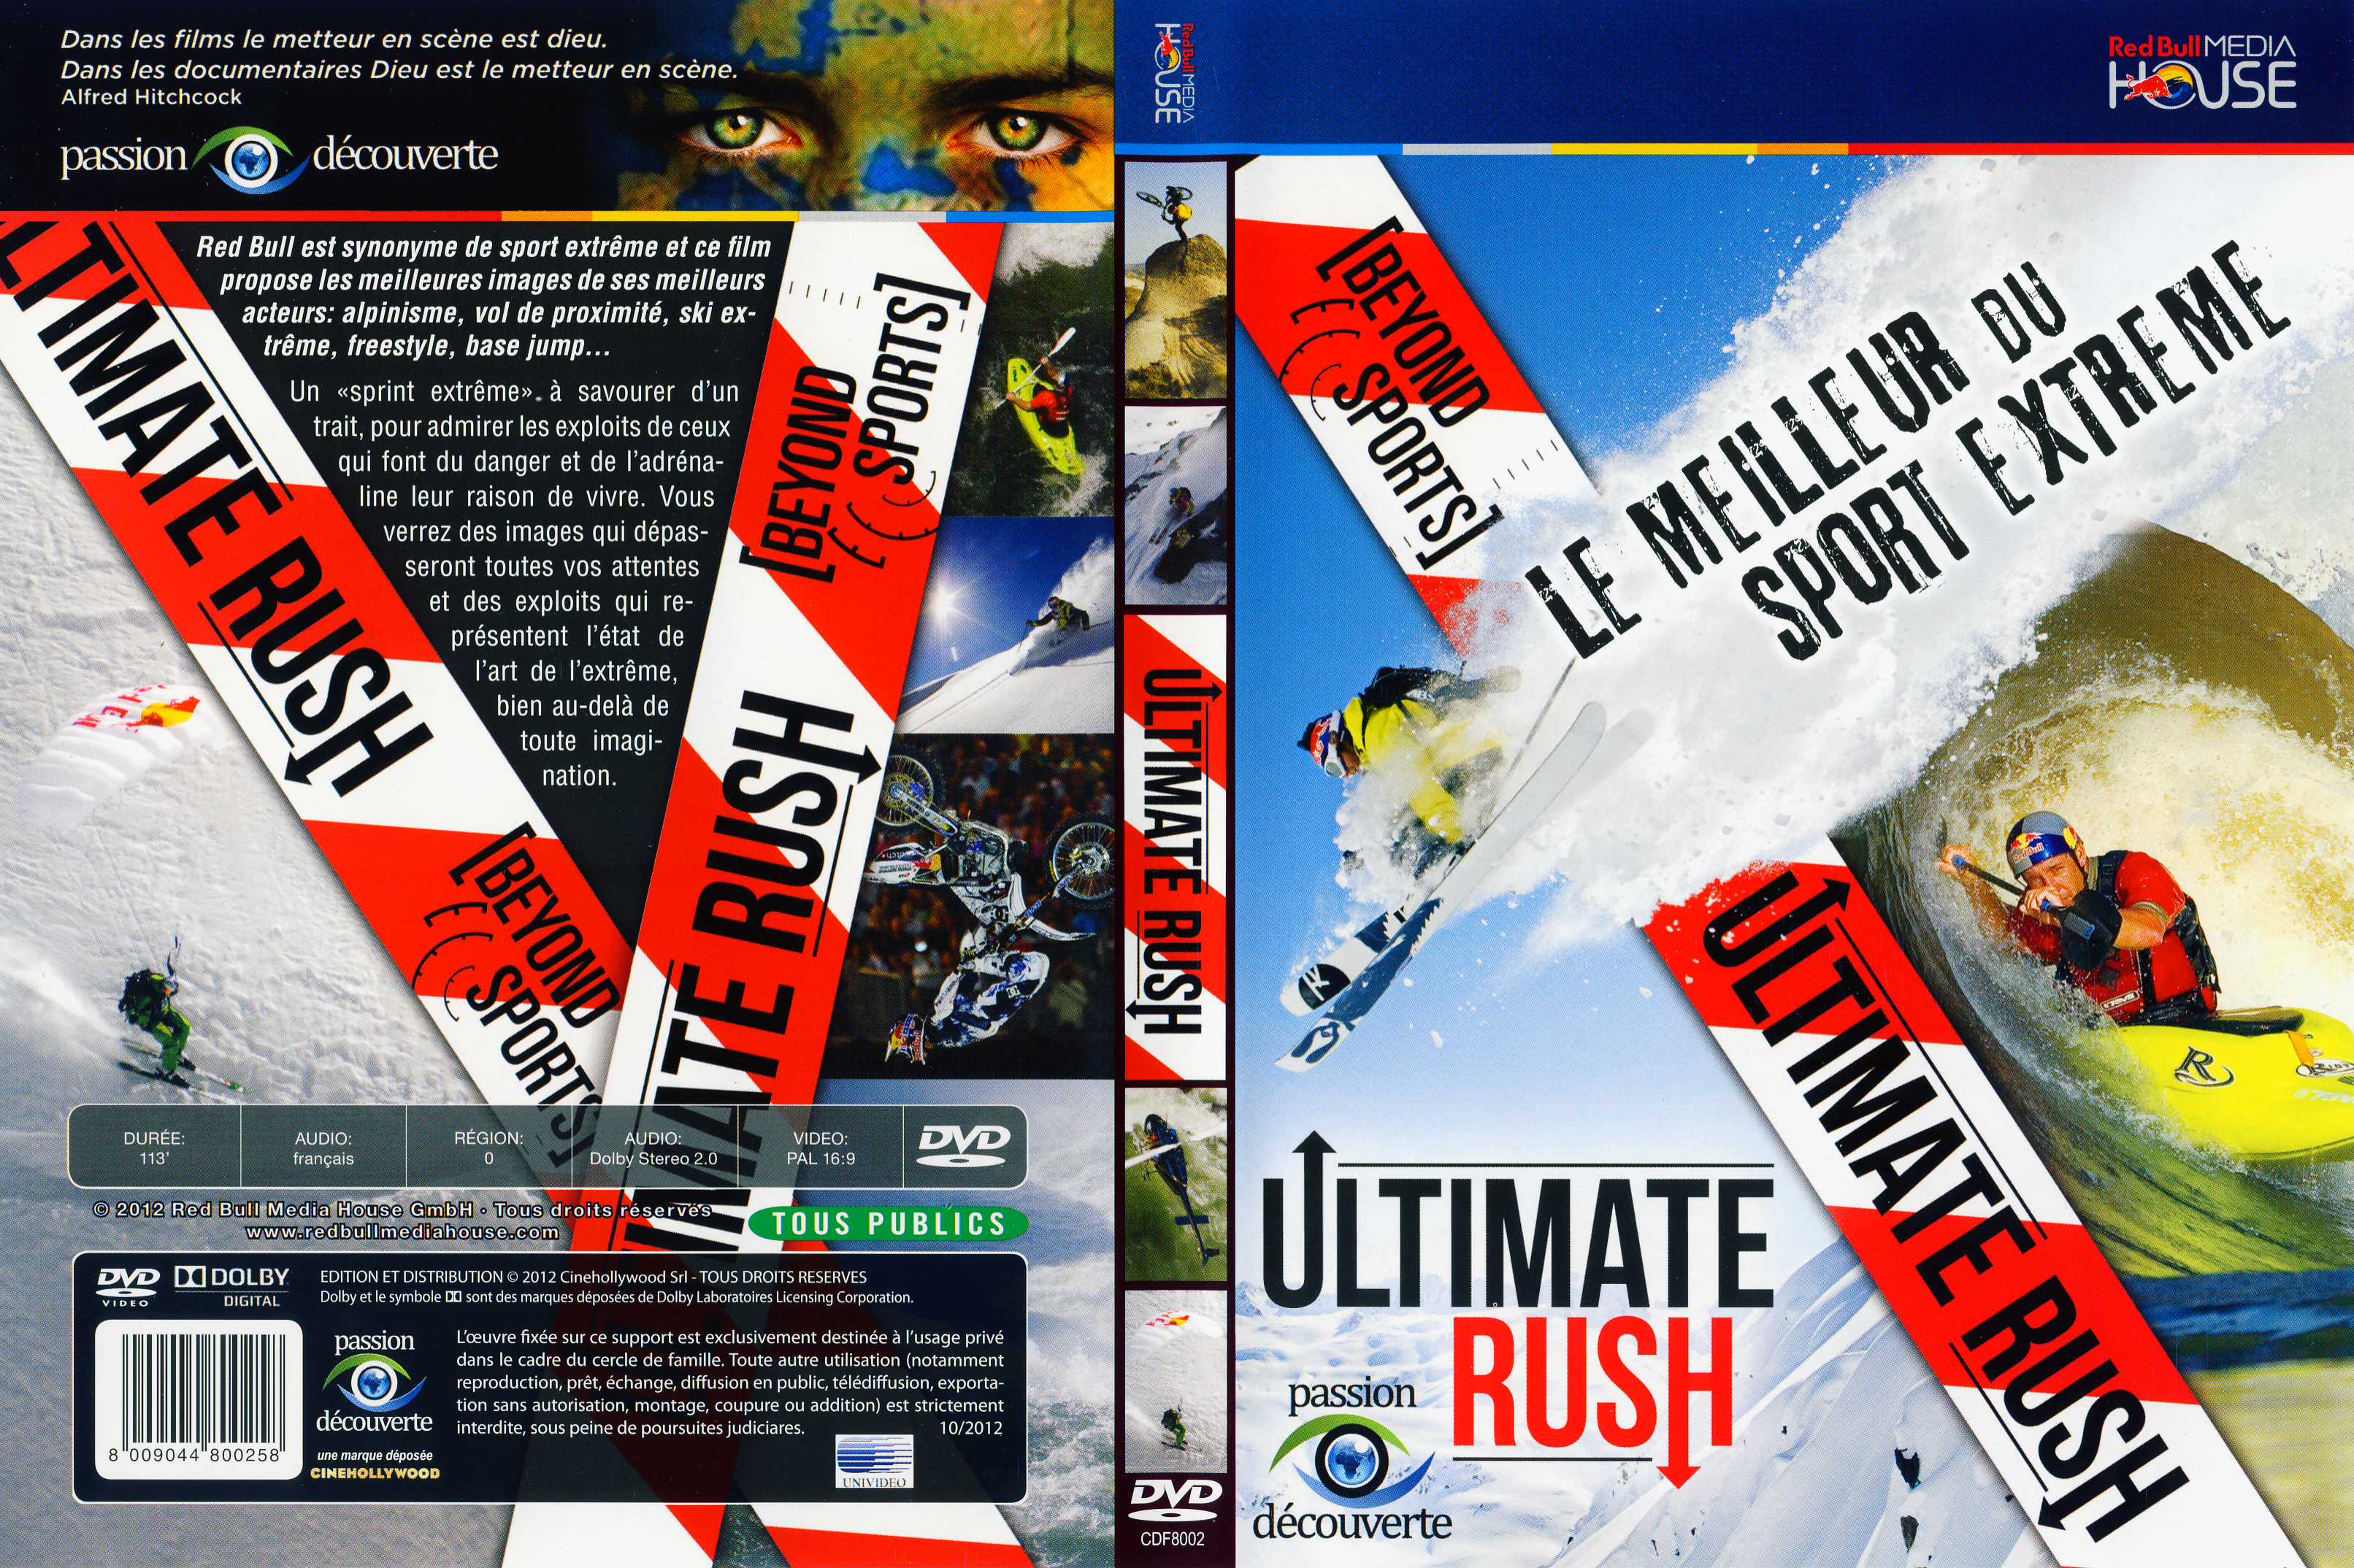 Jaquette DVD Ultimate rush